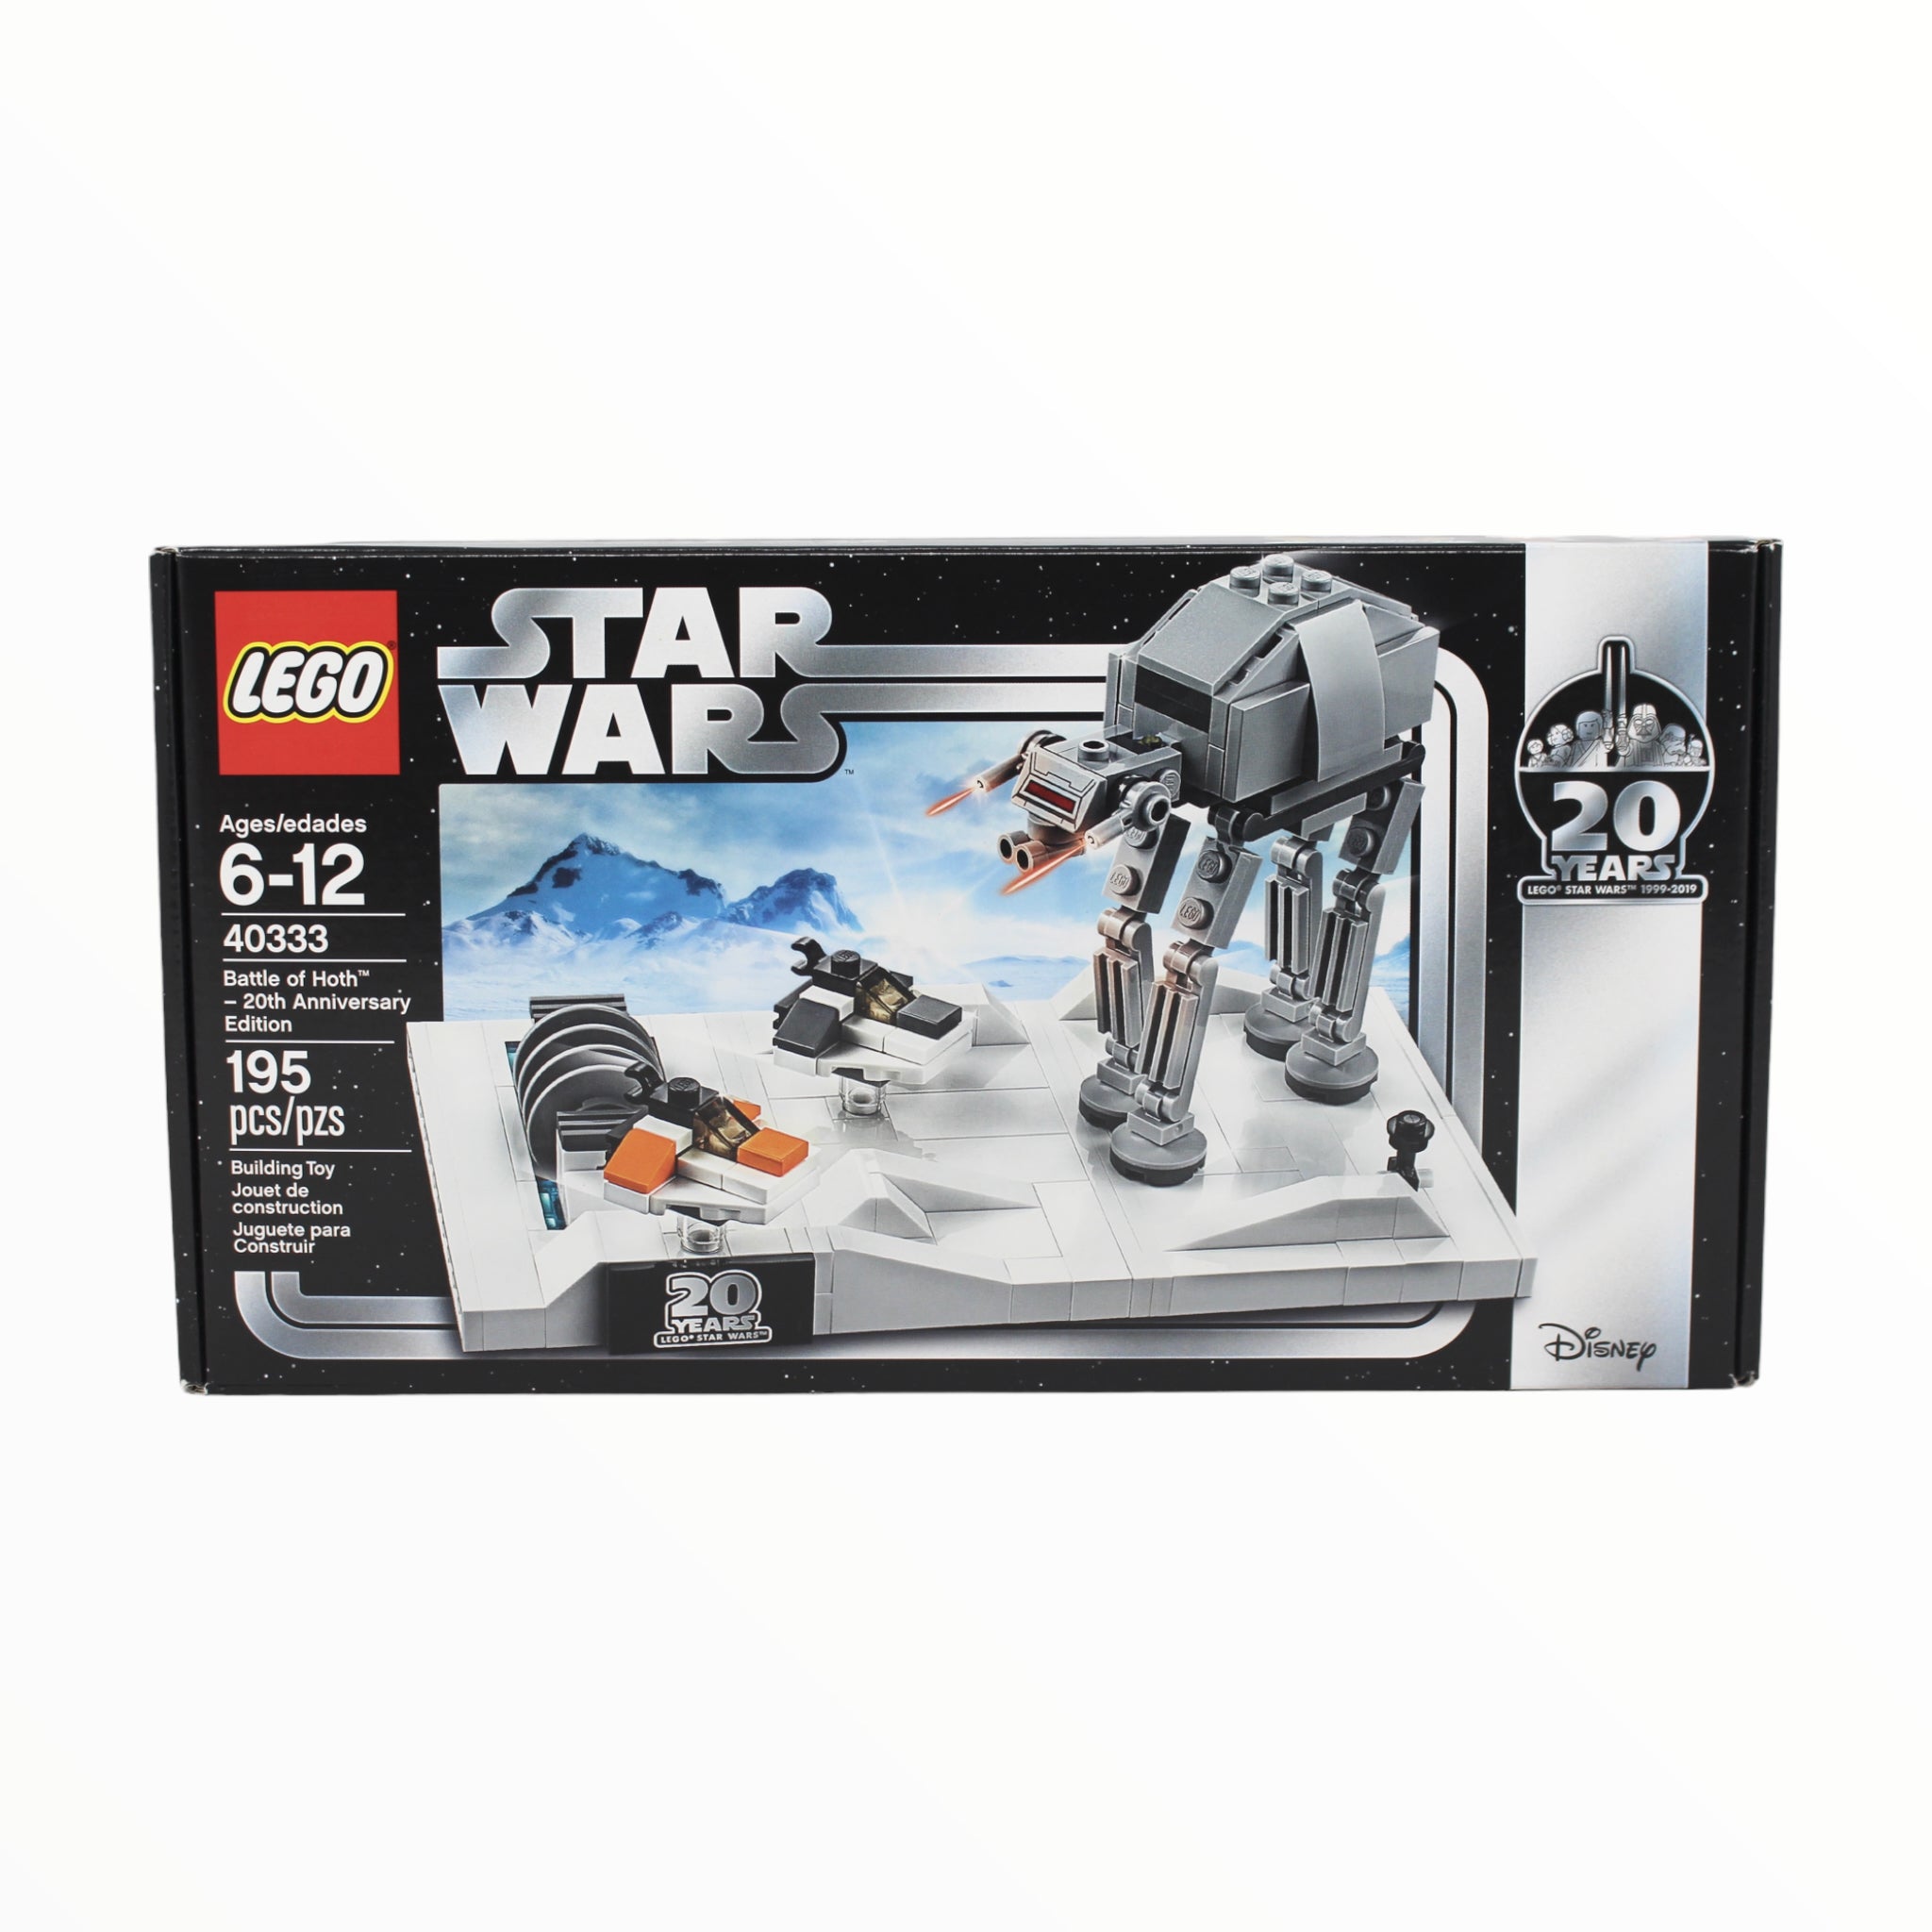 Certified Used Set 40333 Star Wars Battle of Hoth - 20th Anniversary Edition